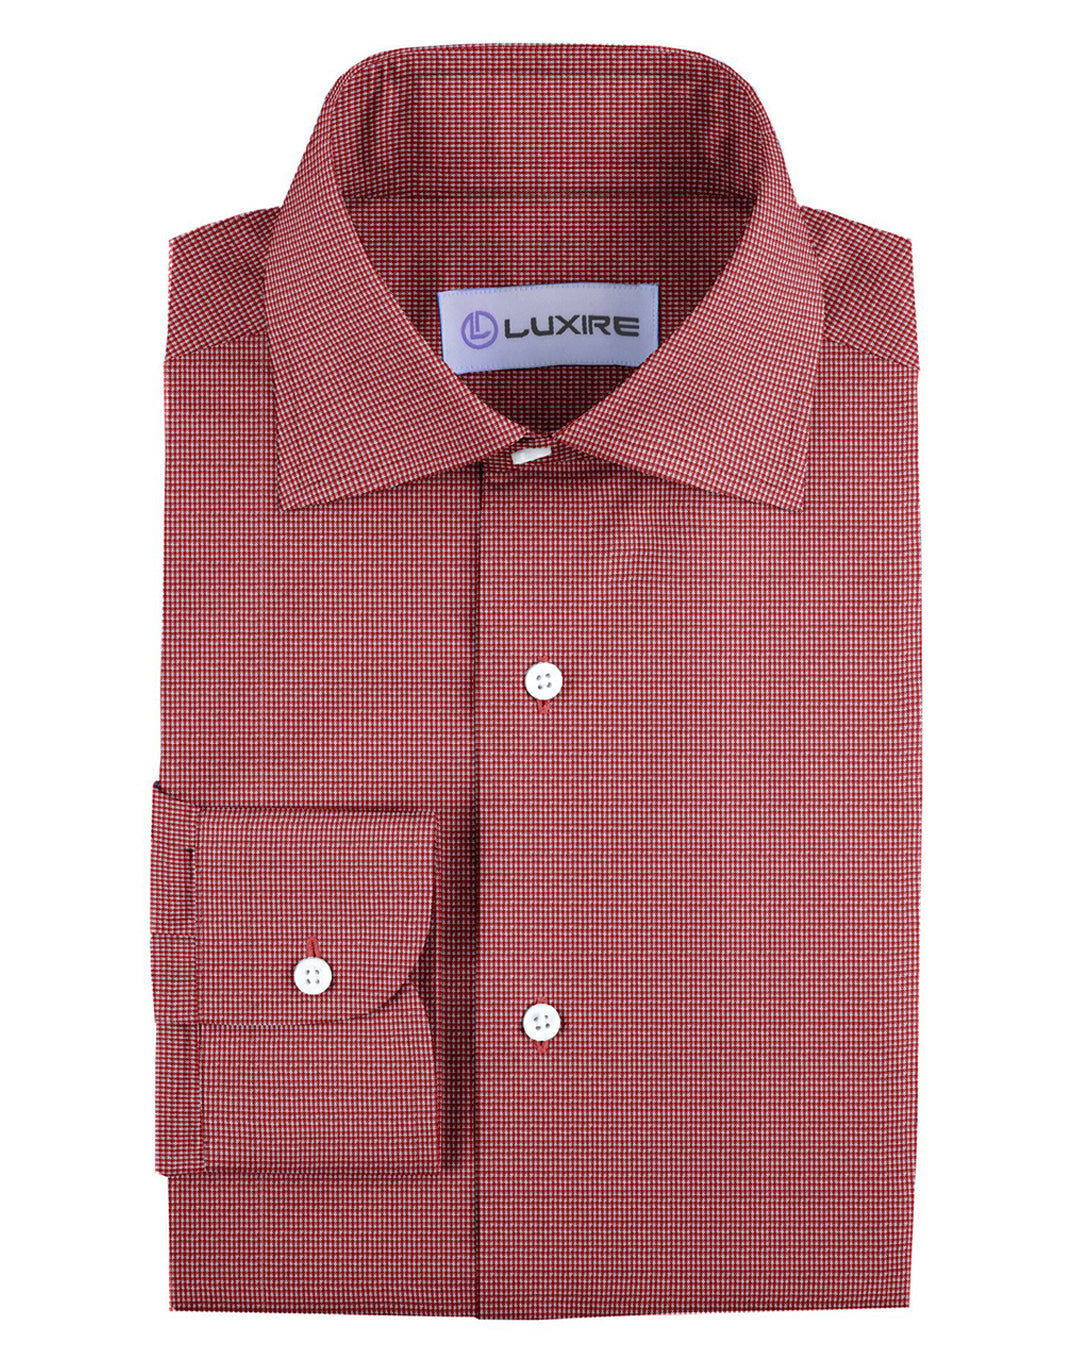 Front of the custom linen shirt for men in red and white checks by Luxire Clothing